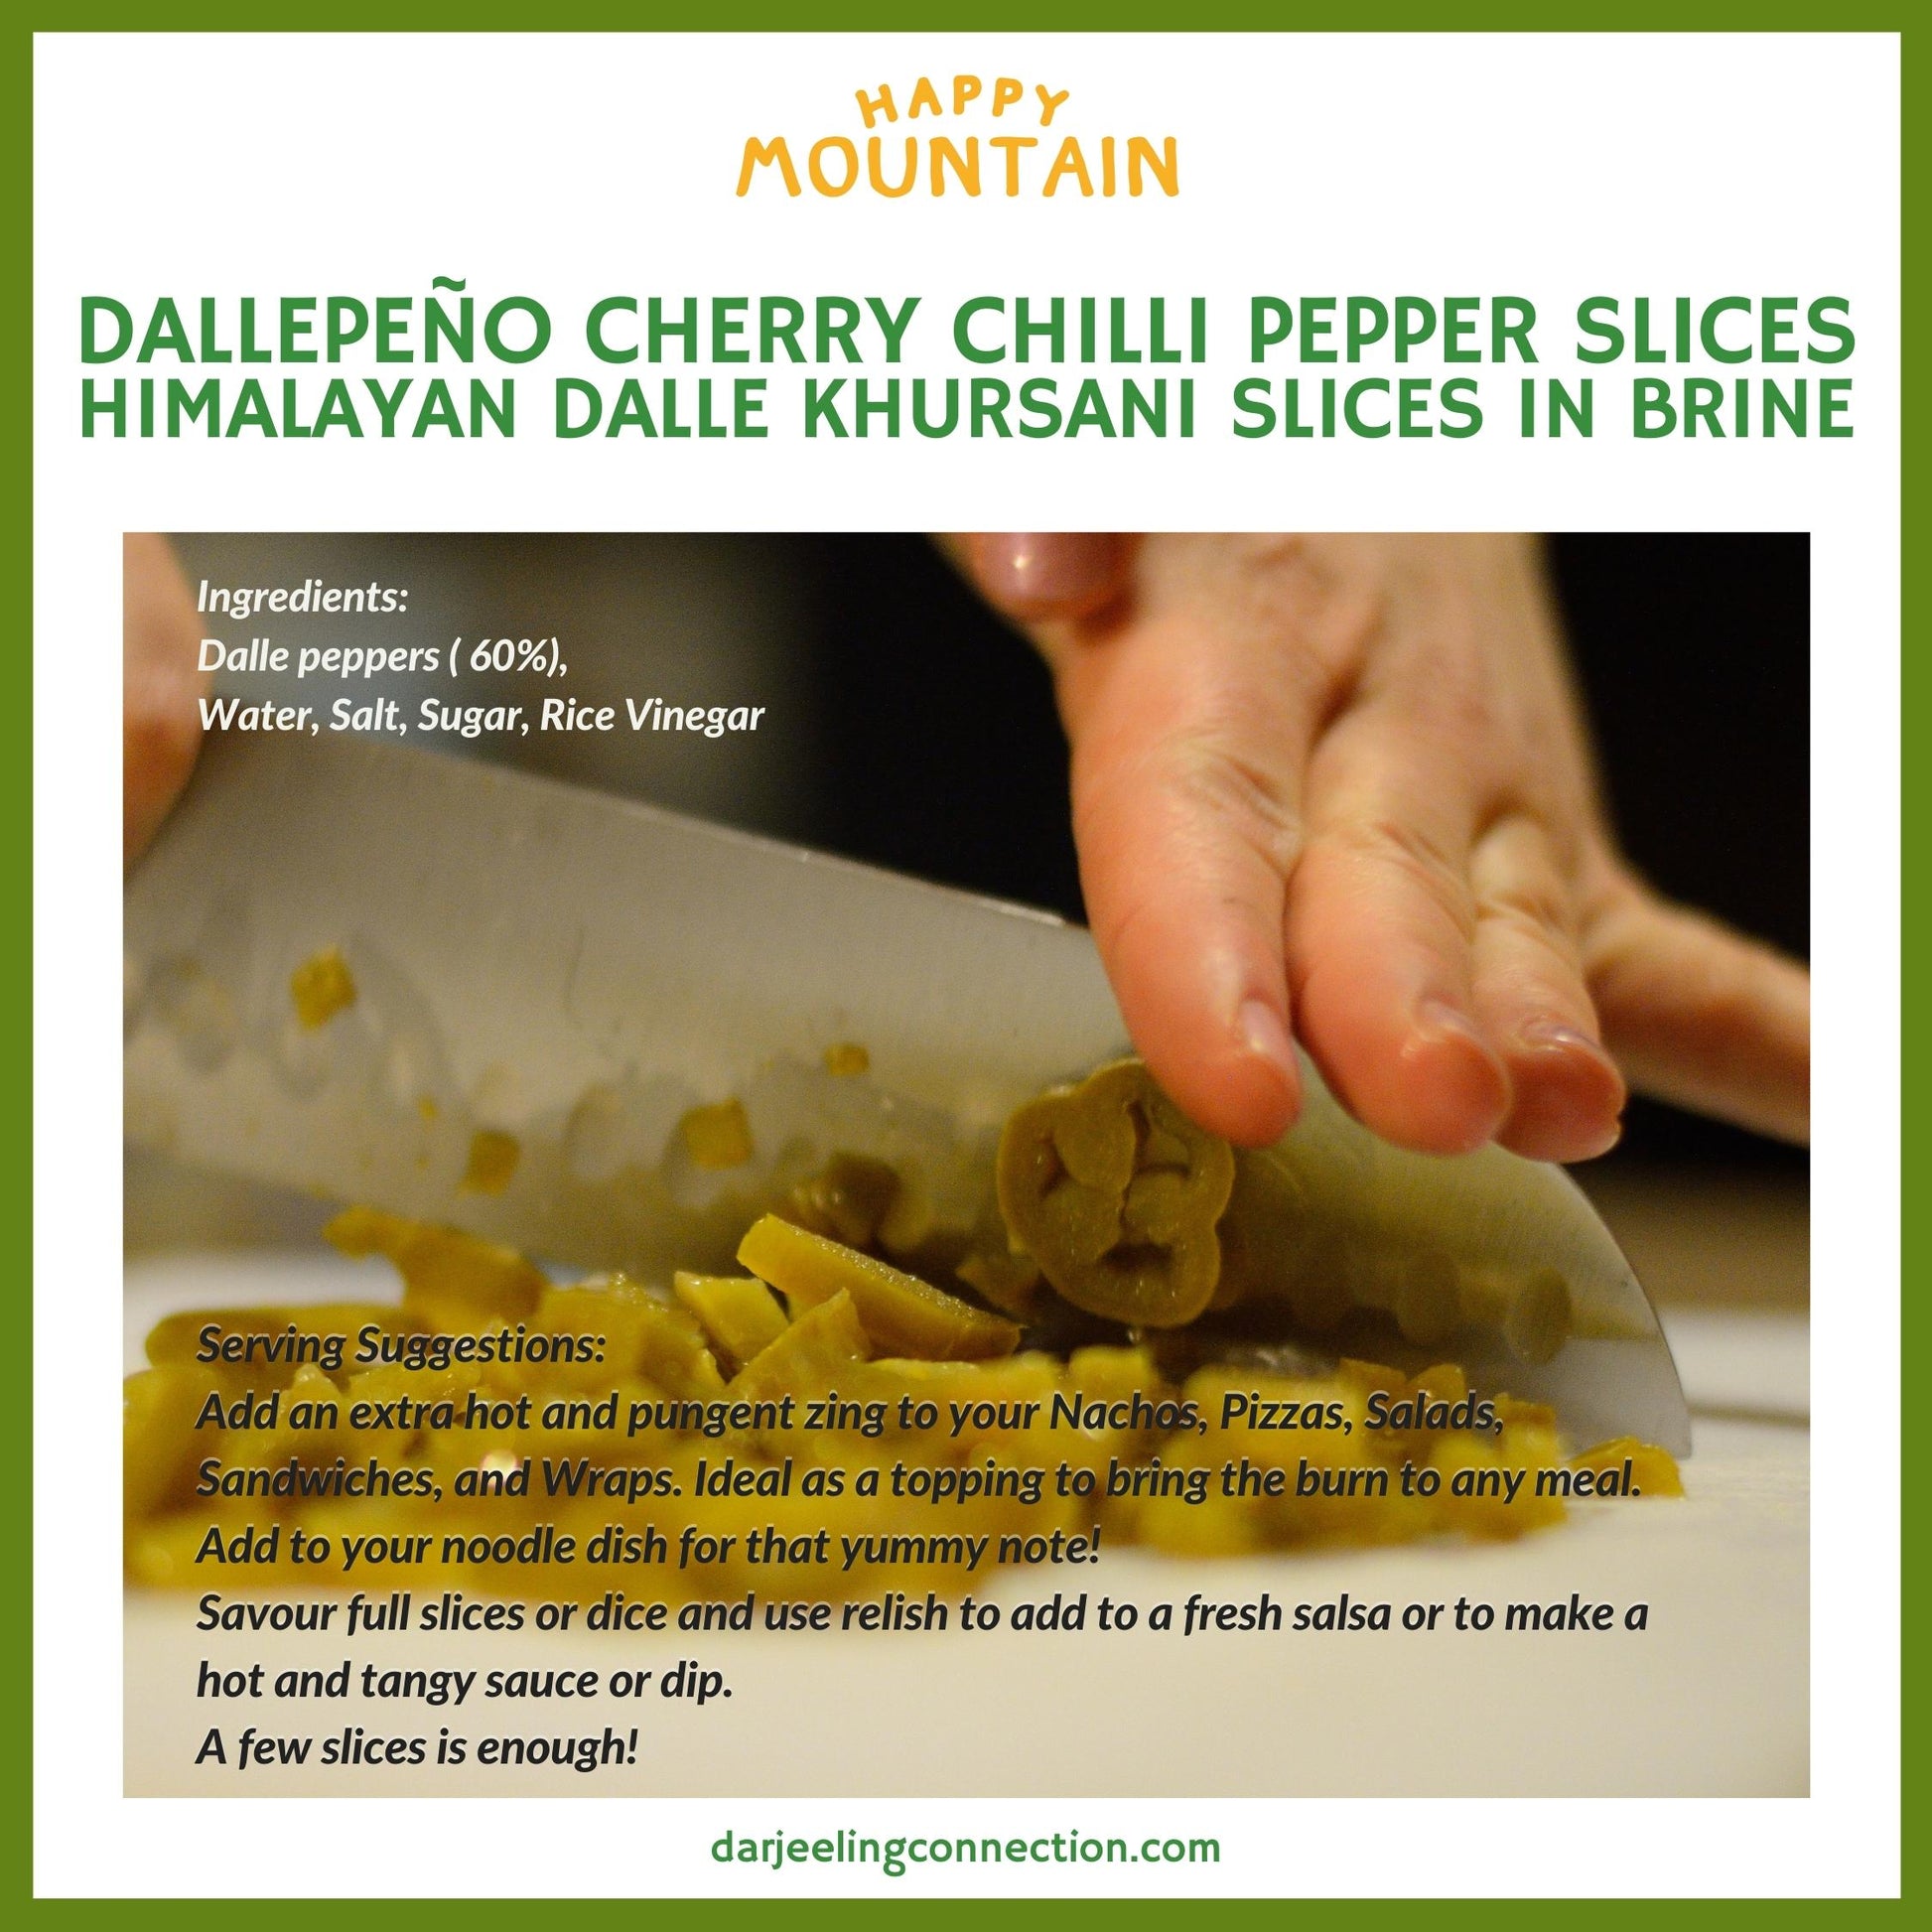 Ingredients Used in Fireballs - Cherry Chilli Pepper (Dalle) Slices - Happy Mountain